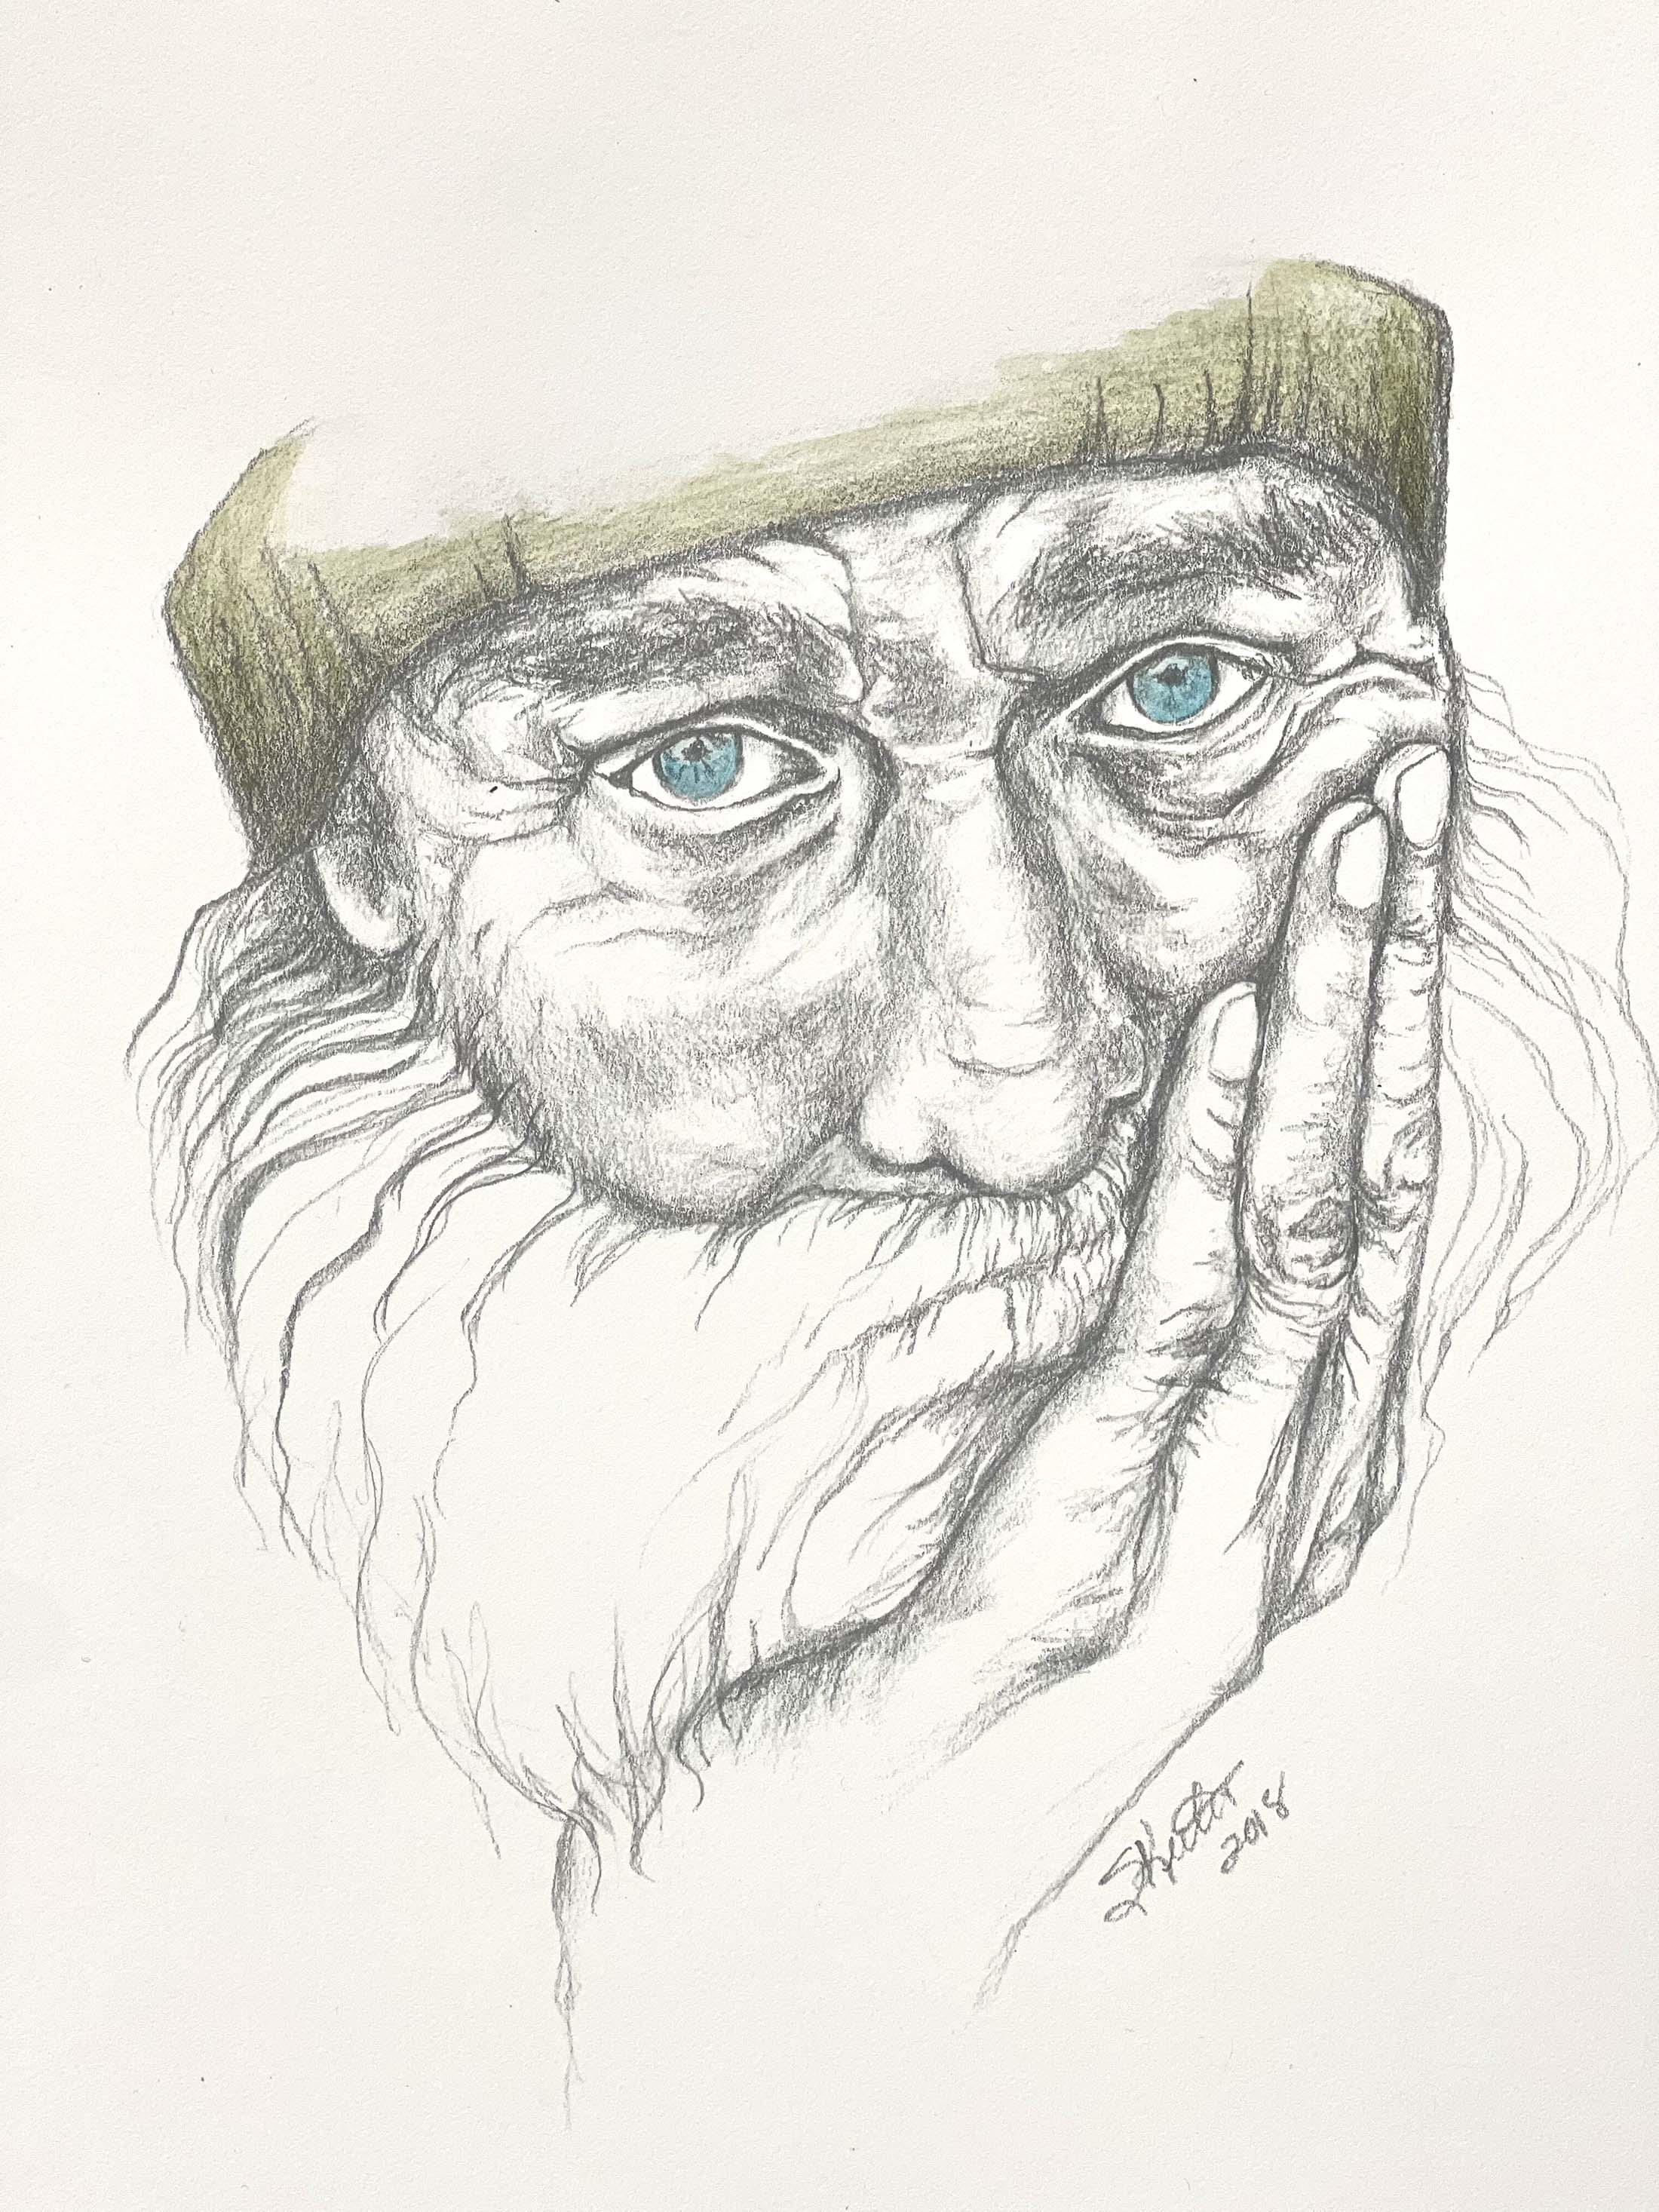 COLORED PENCIL, OLD MAN WITH WRINKLES AND A STORY